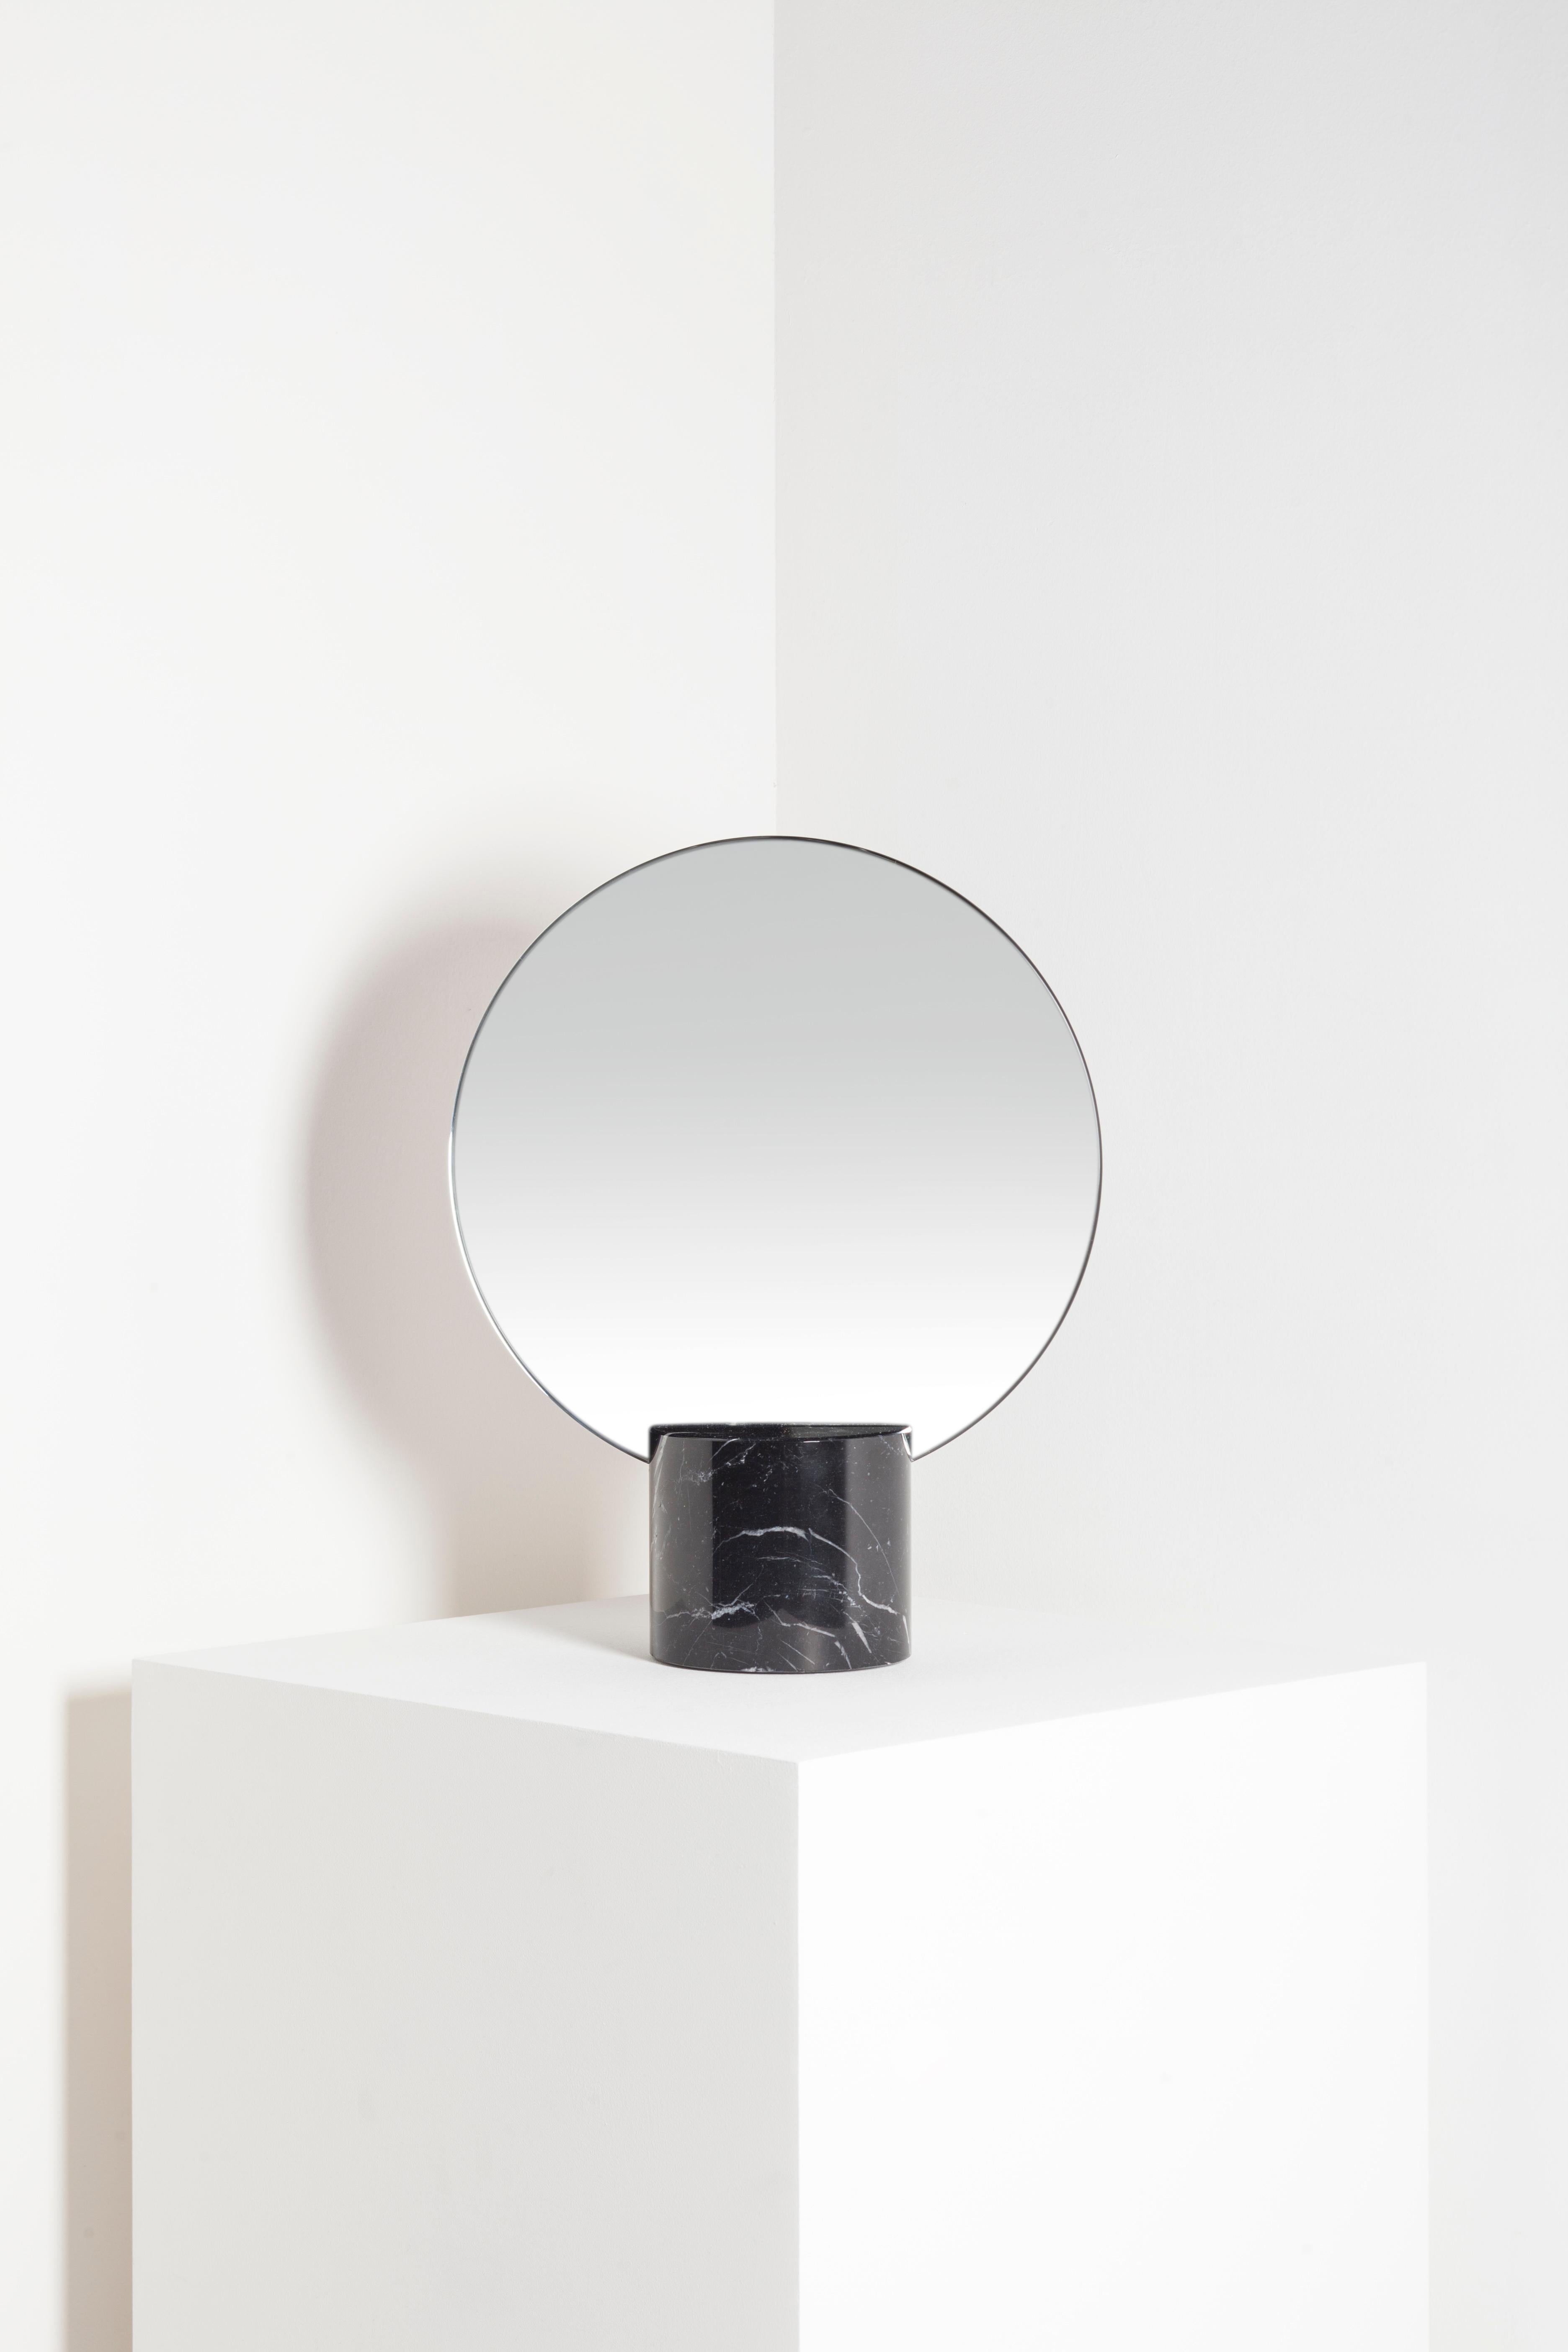 Sun Marquina marble mirror by Joseph Vila Capdevila
Material: Marquina marble, brass and mirror
Dimensions: 30 x 38 x 12 cm
Weight: 4.7 kg

Luxurious mirror in two separated parts: the base, made with premium Carrara marble, and mirror, that